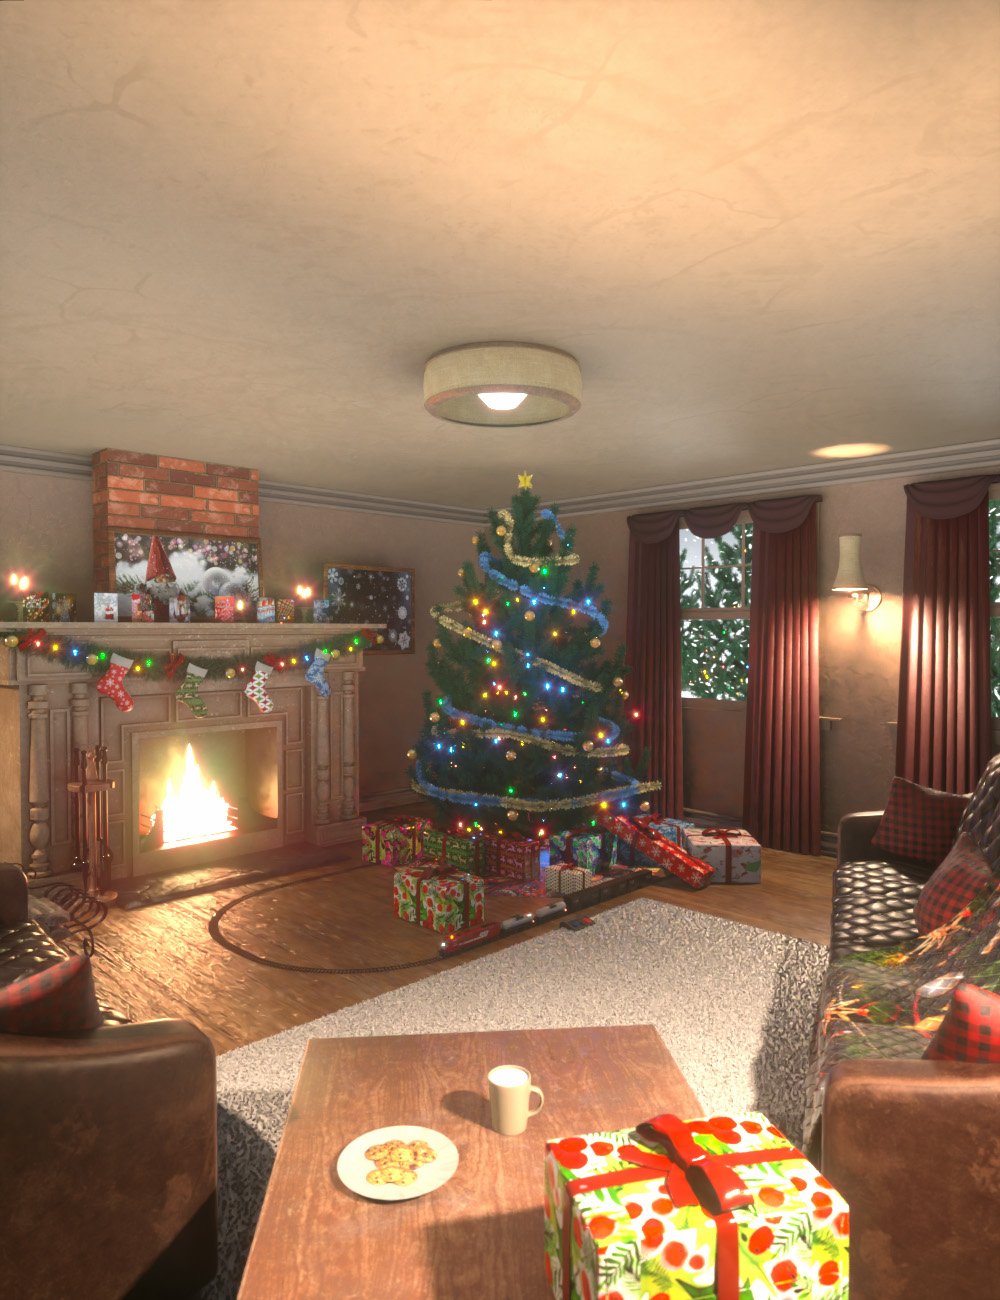 Cozy Christmas Living Room by: AcharyaPolina, 3D Models by Daz 3D